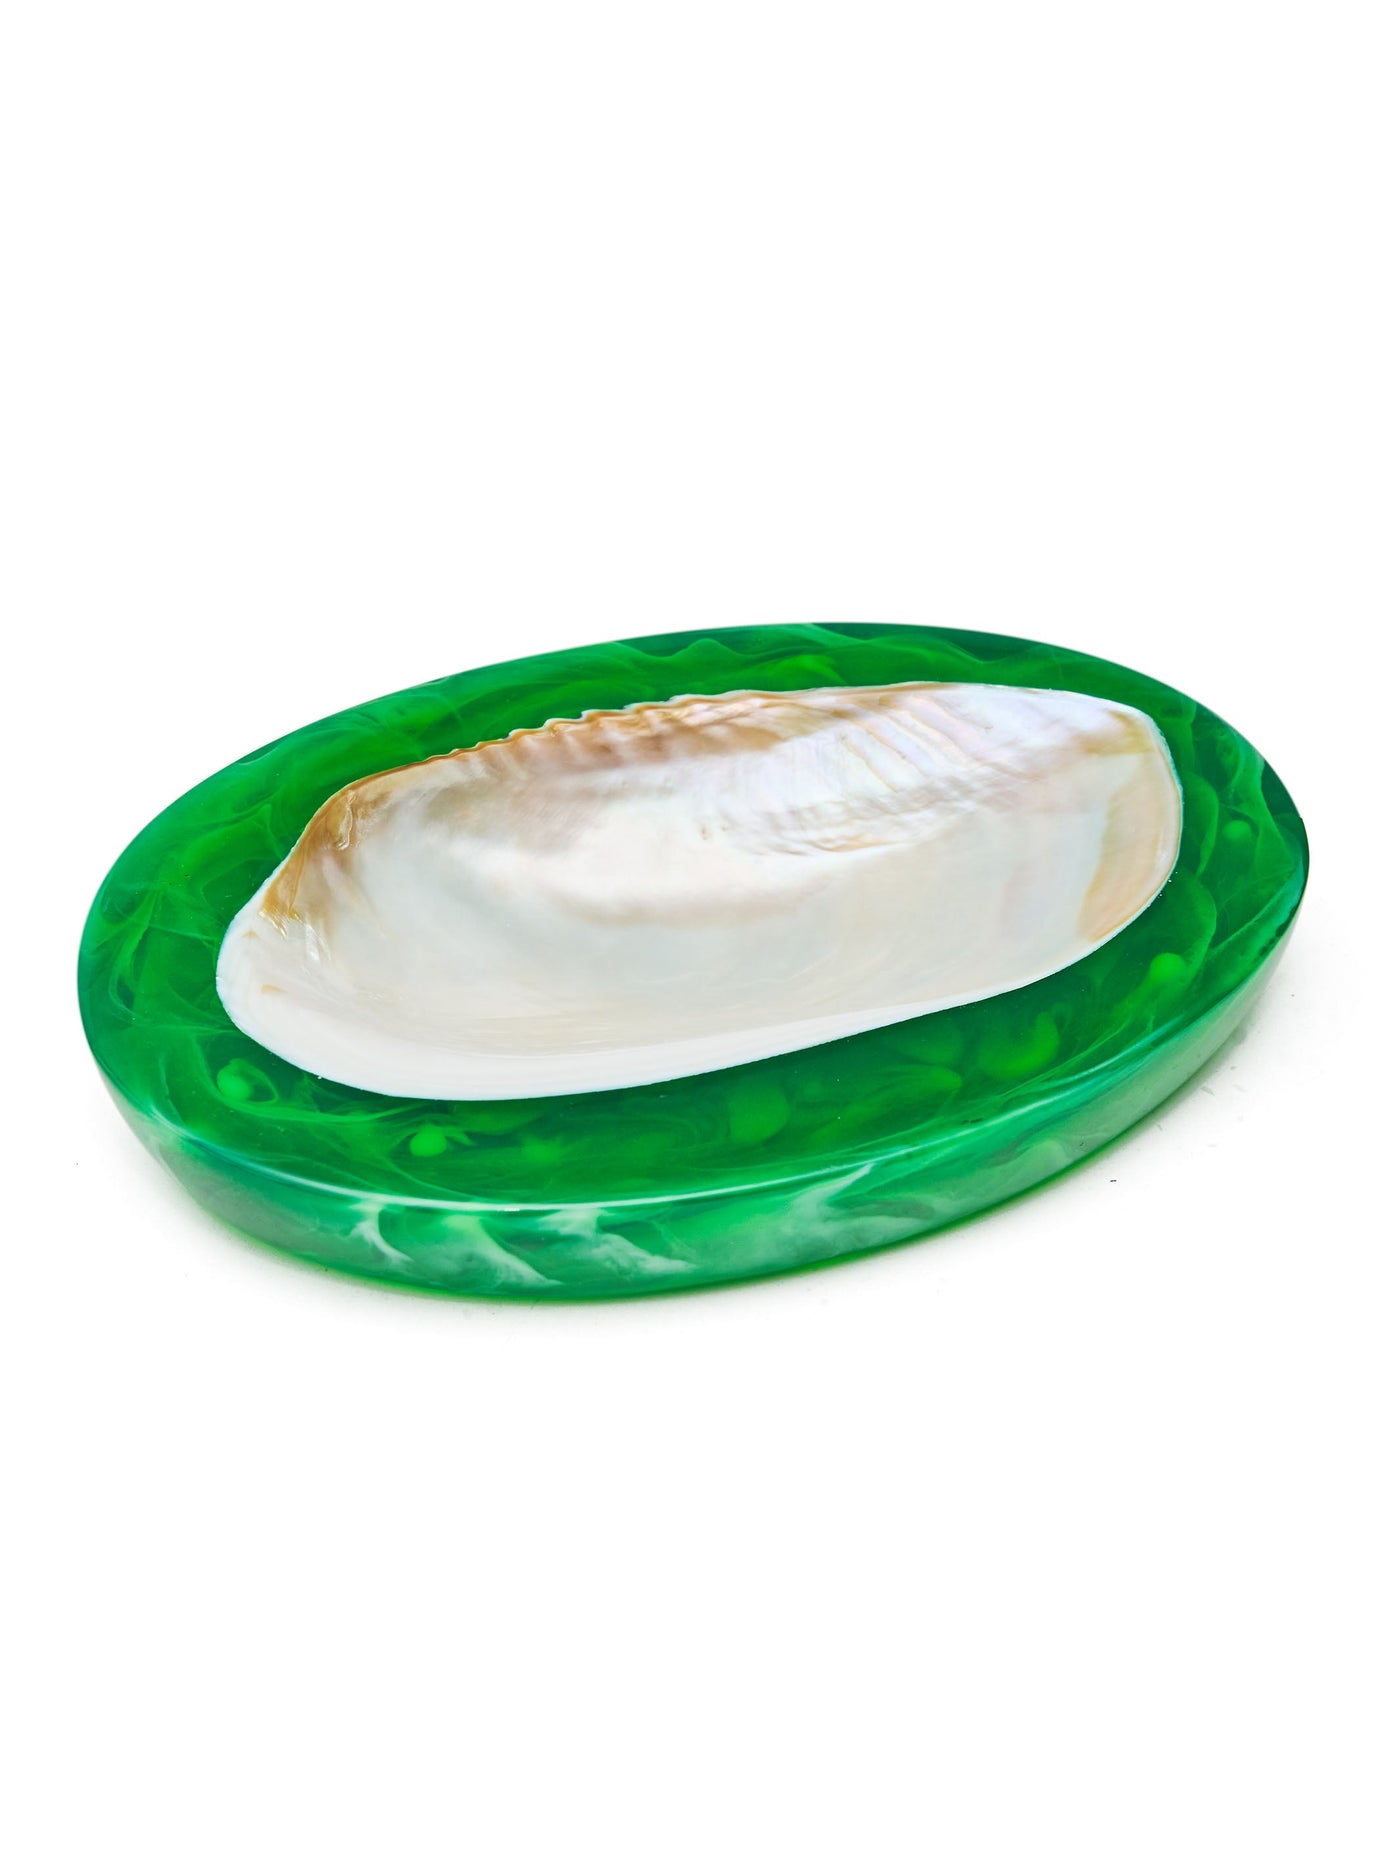 Large Caviar Dish in Green by Lily Juliet